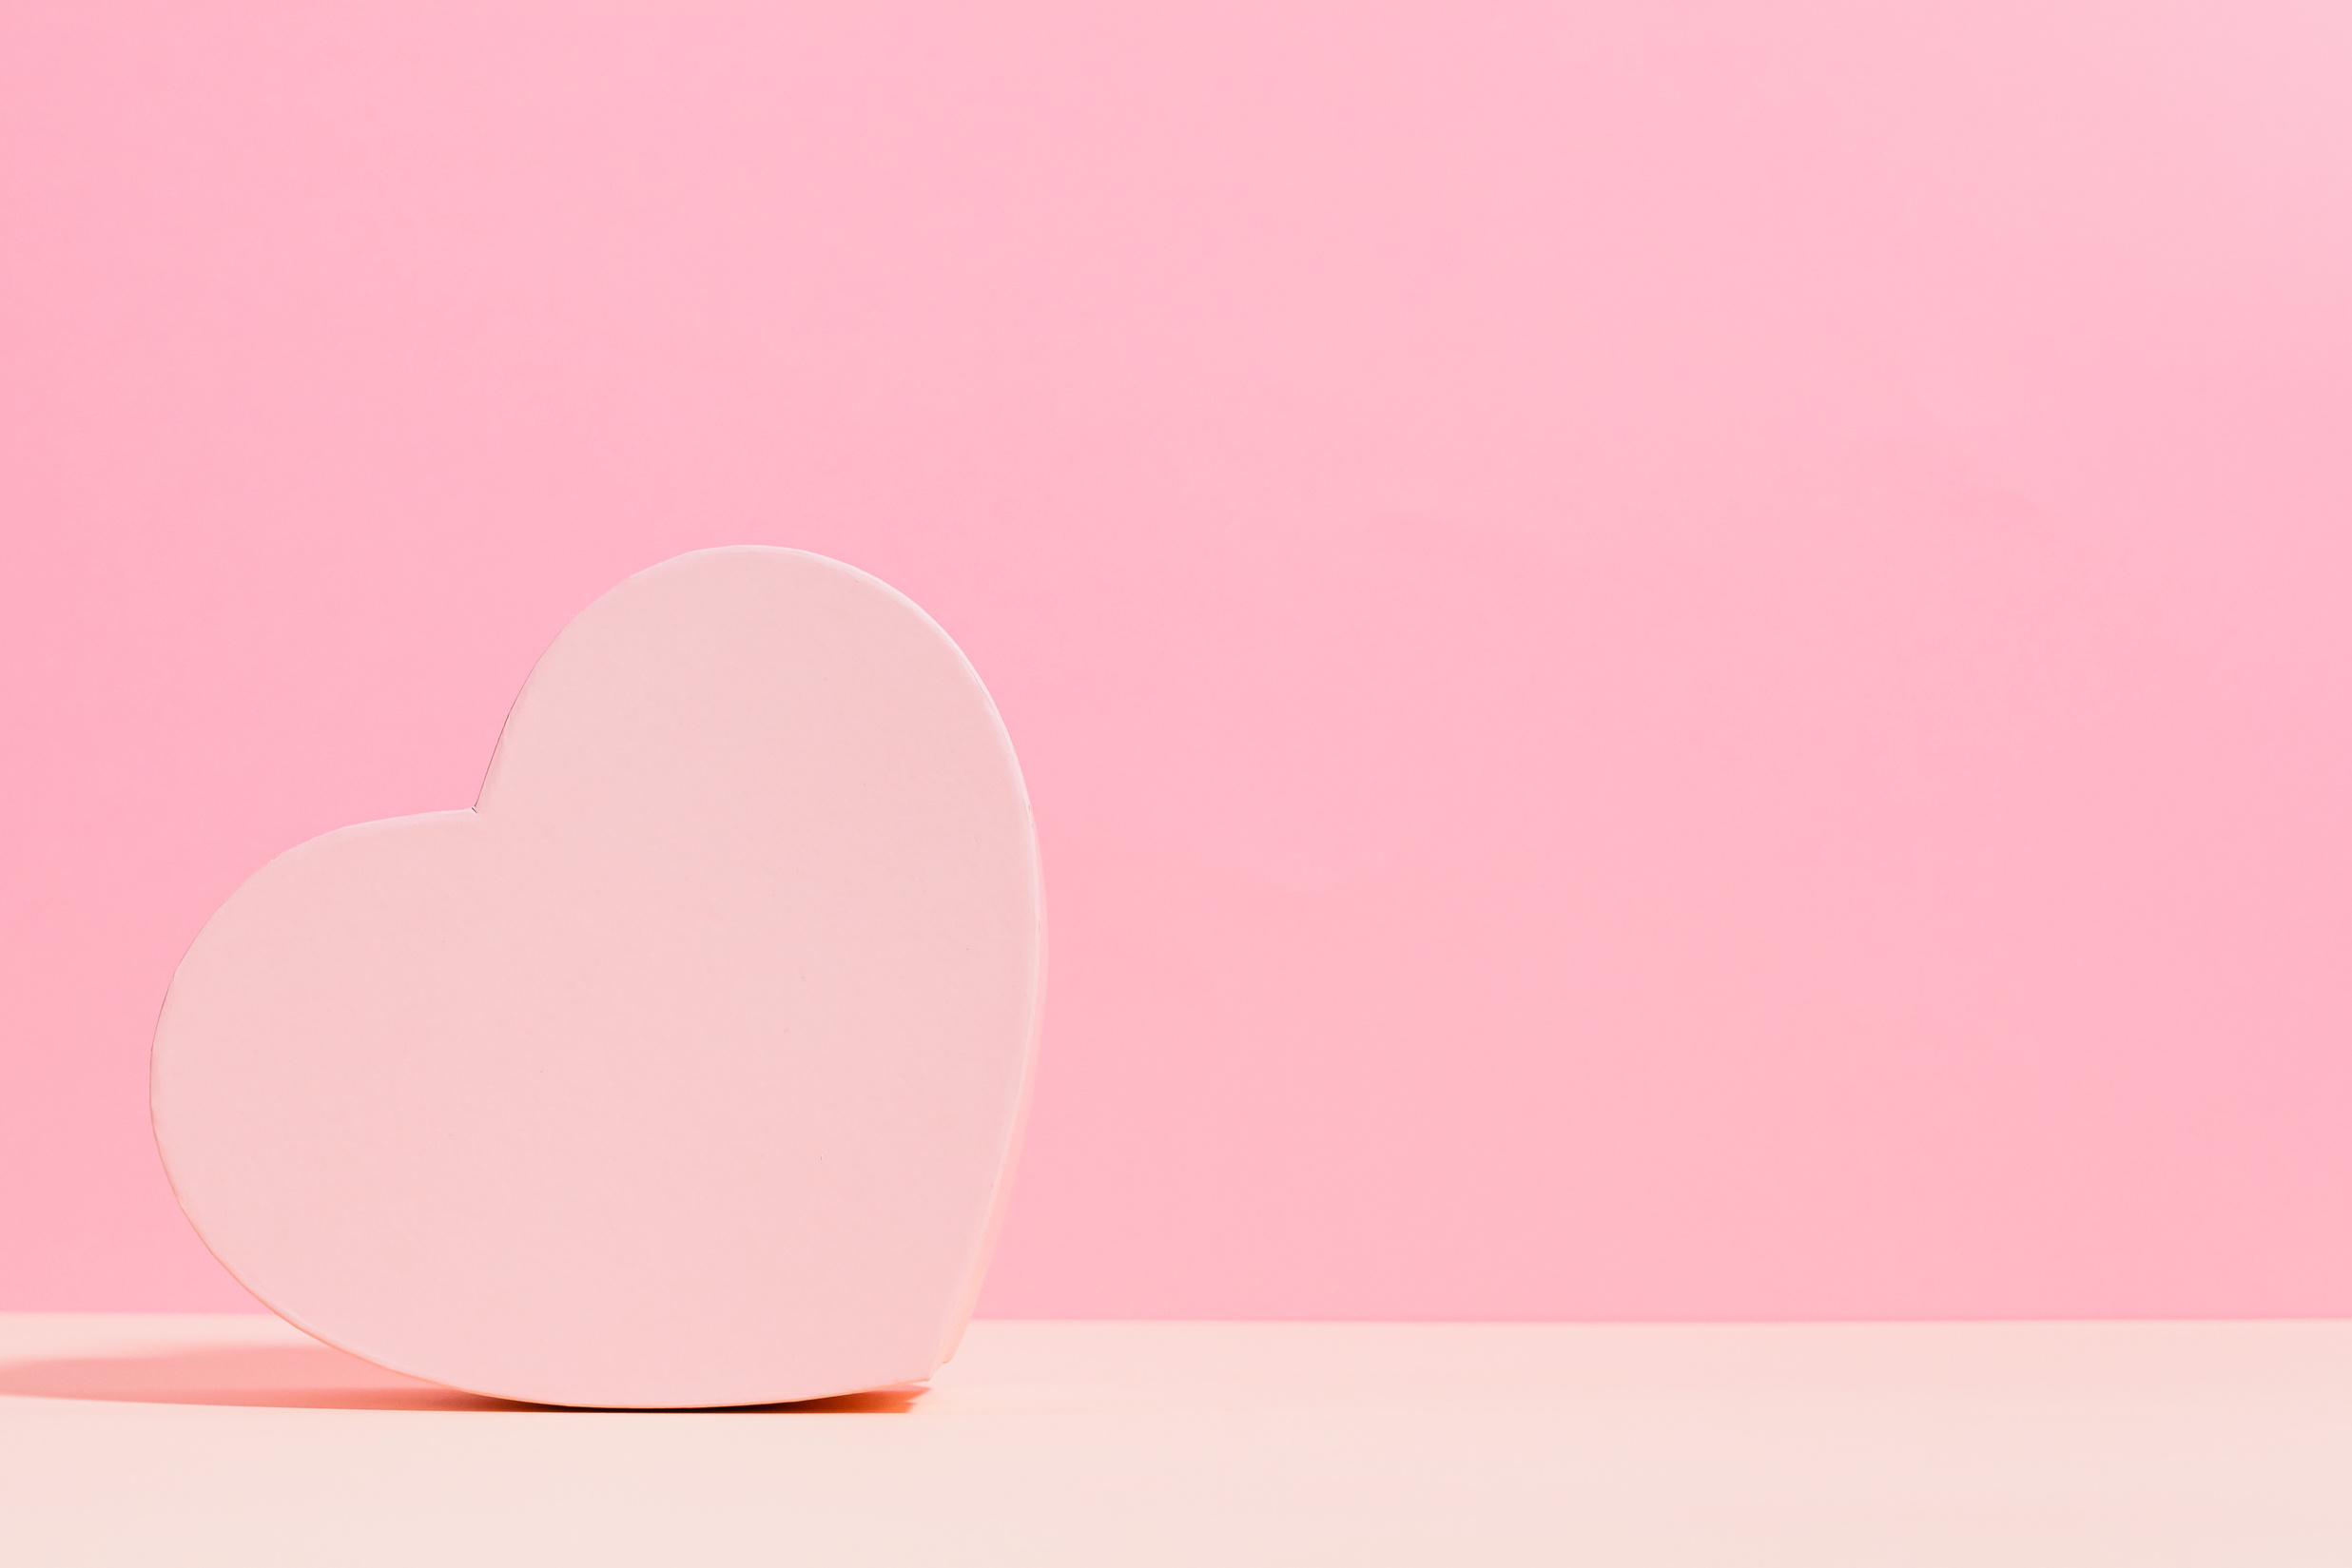 Love Heart on a Pink Background